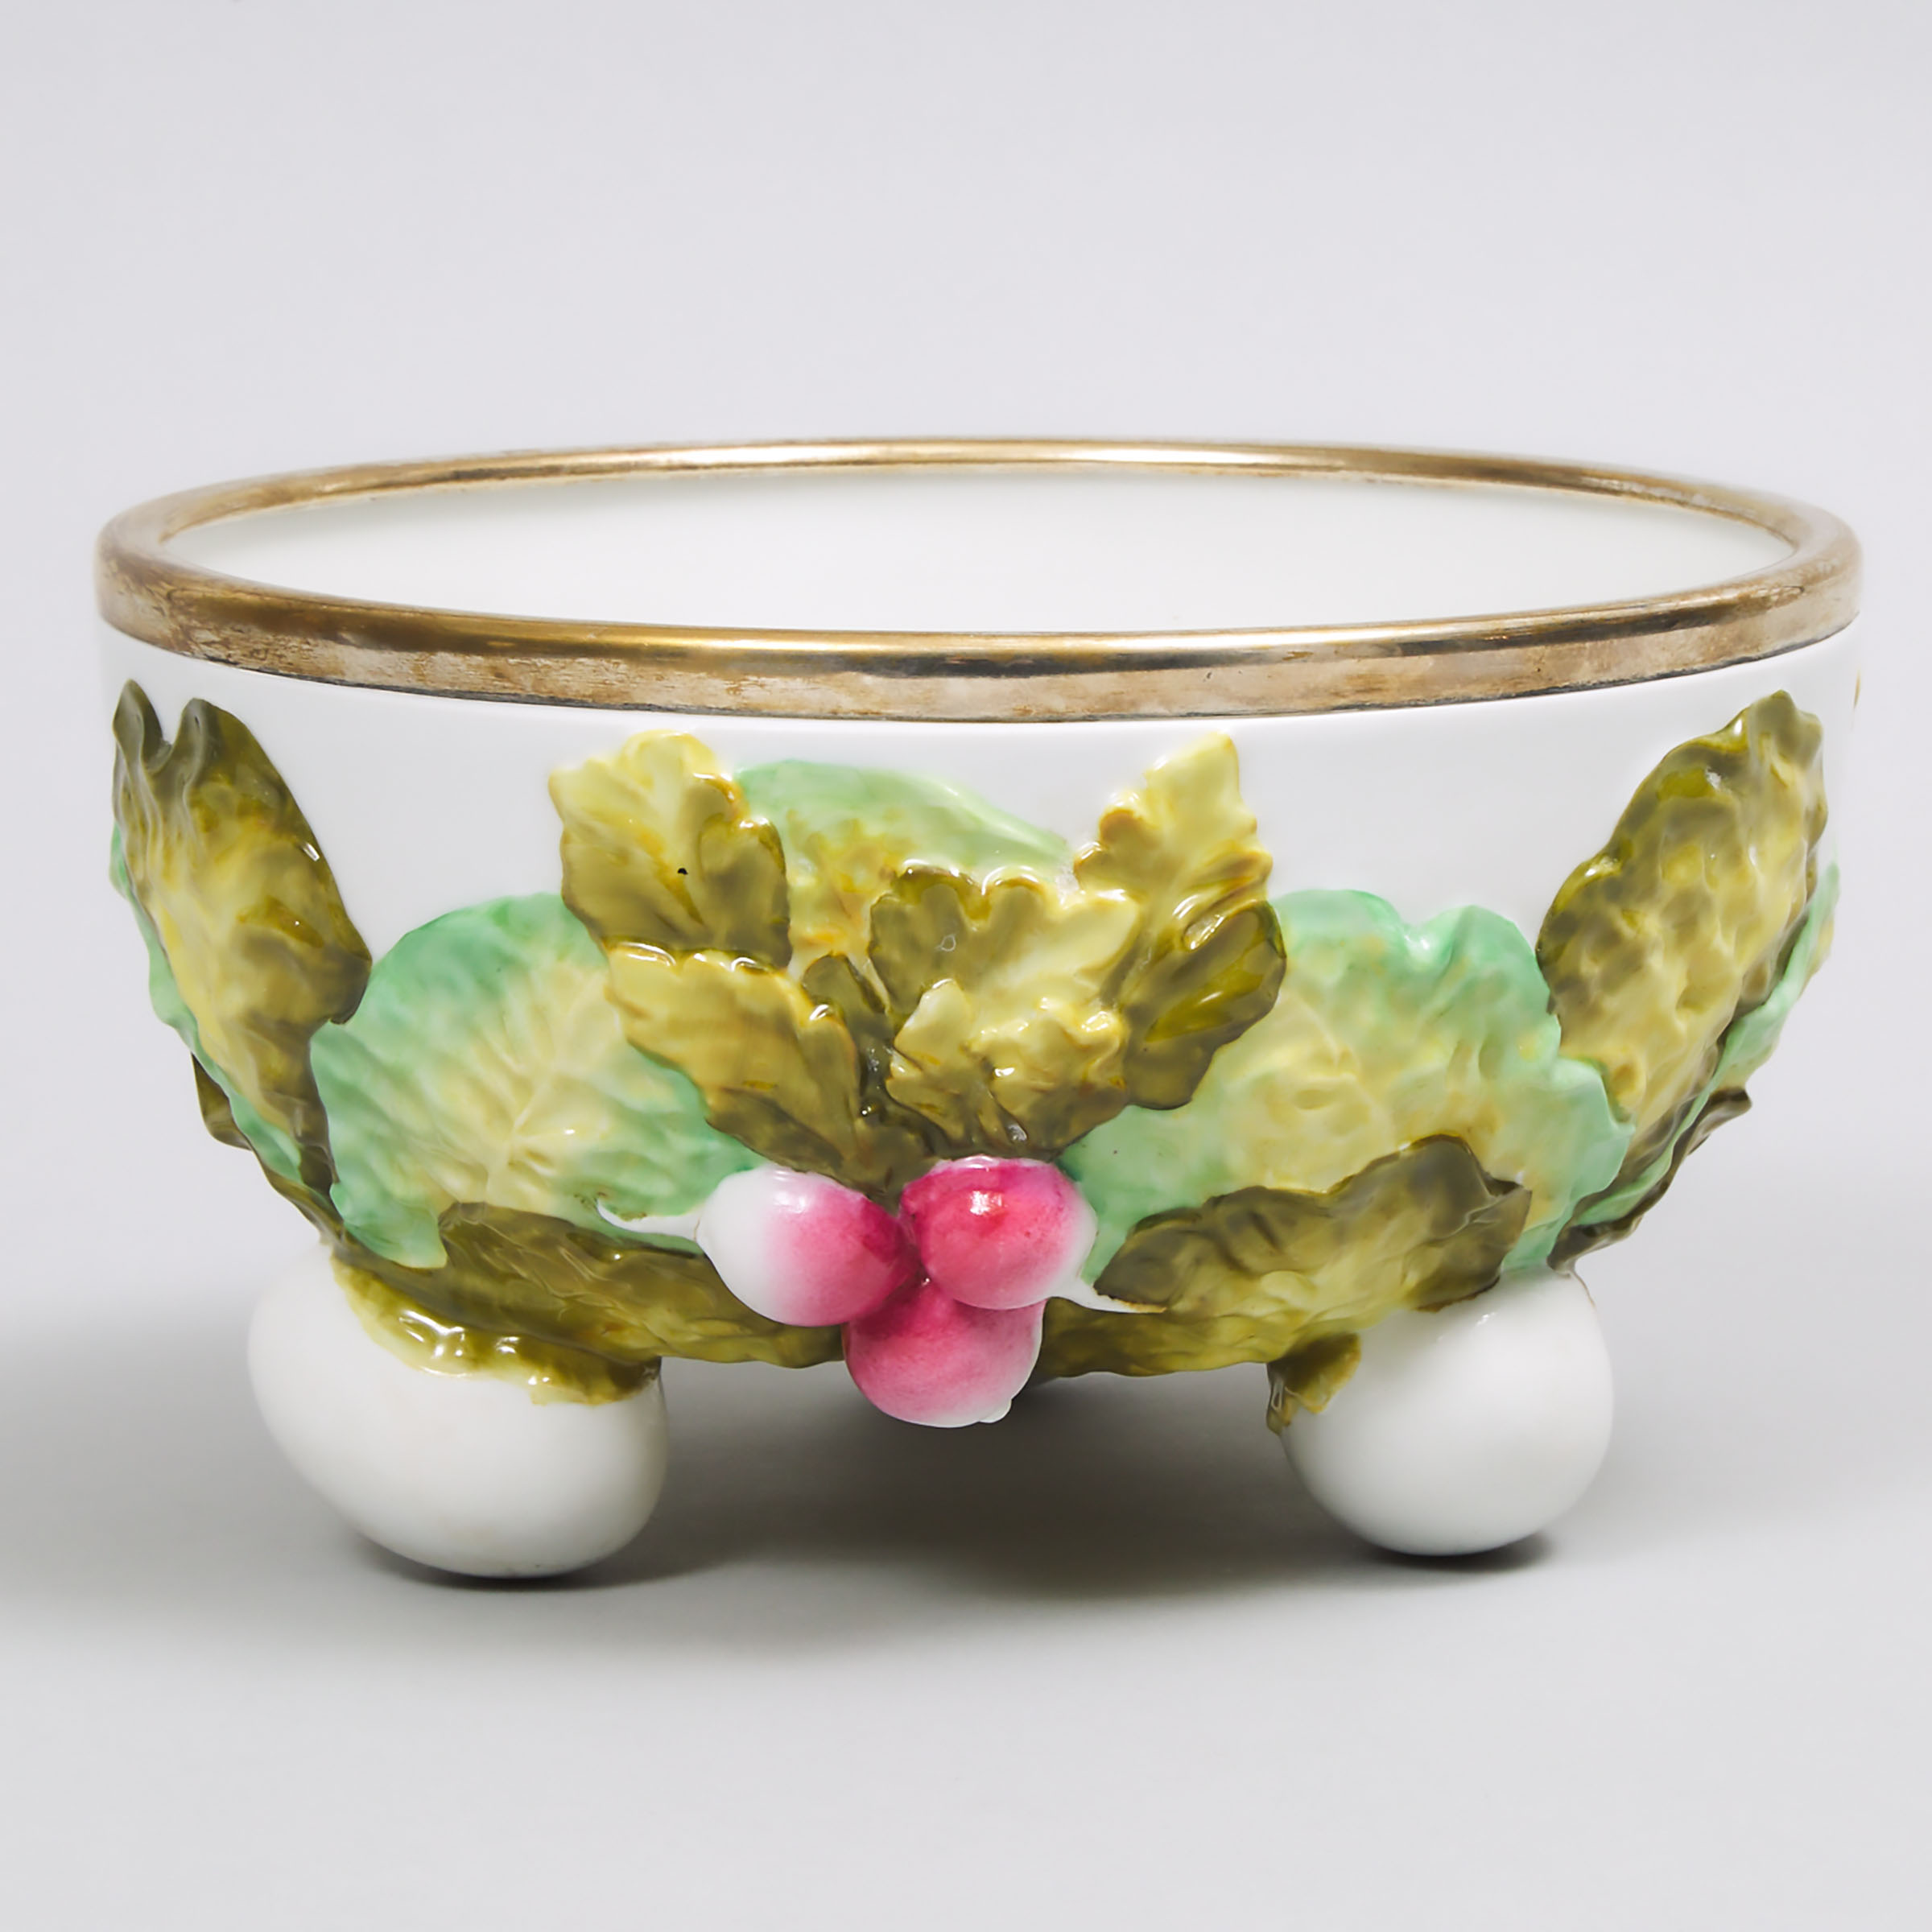 German Silvered Metal Mounted Porcelain Salad Bowl, early 20th century